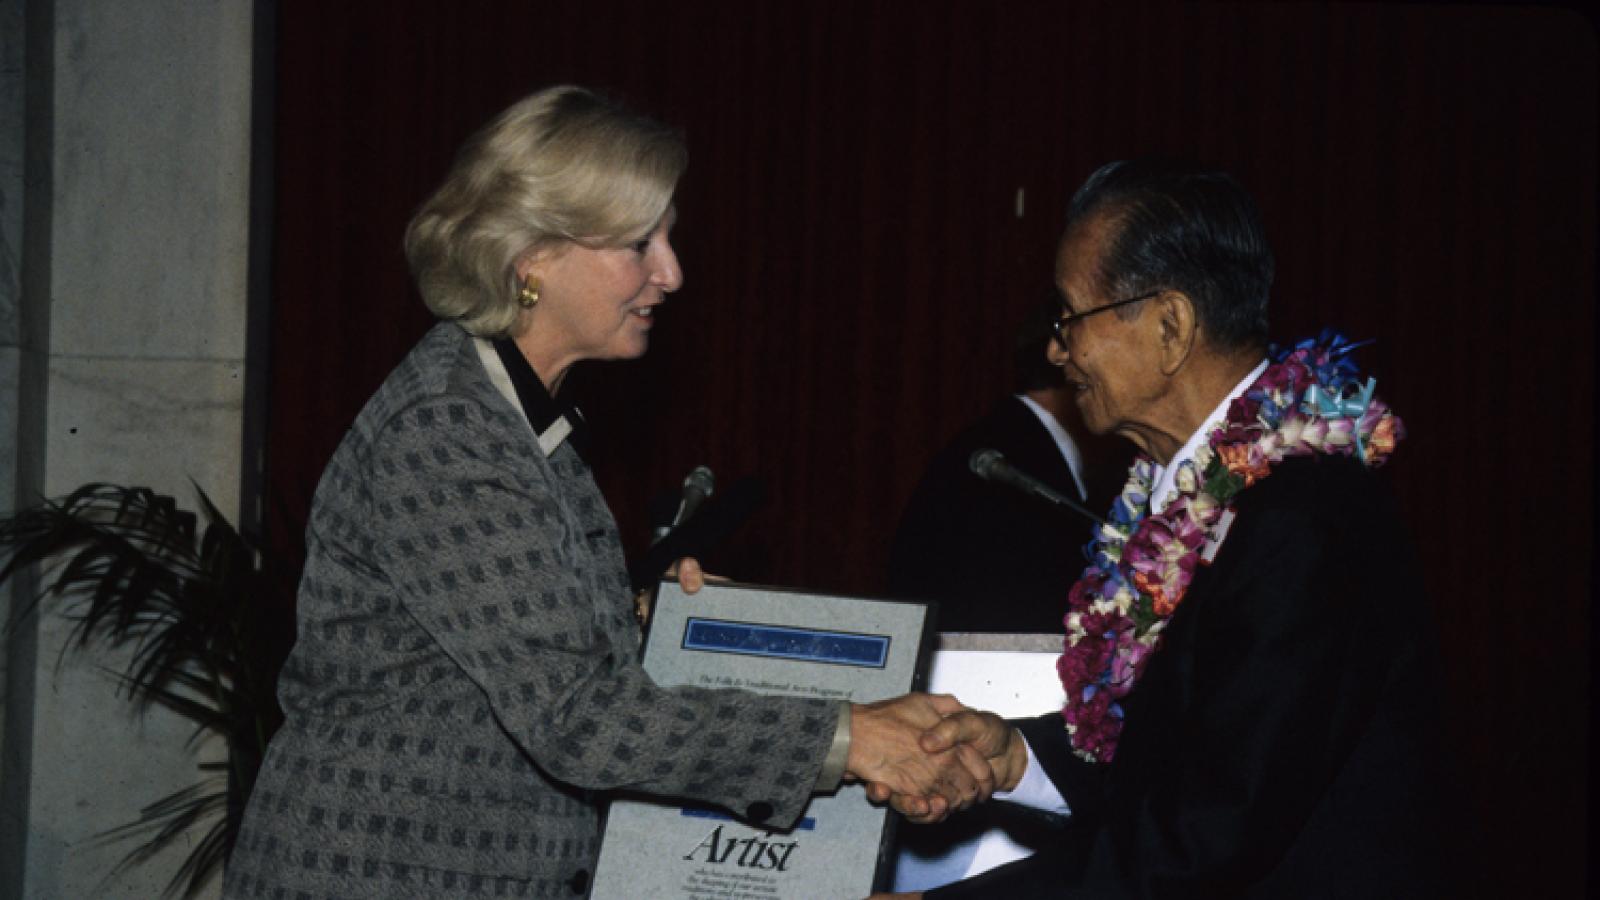 A woman with blond hair presents a large framed certificate to a man in glasses wearing a lei.